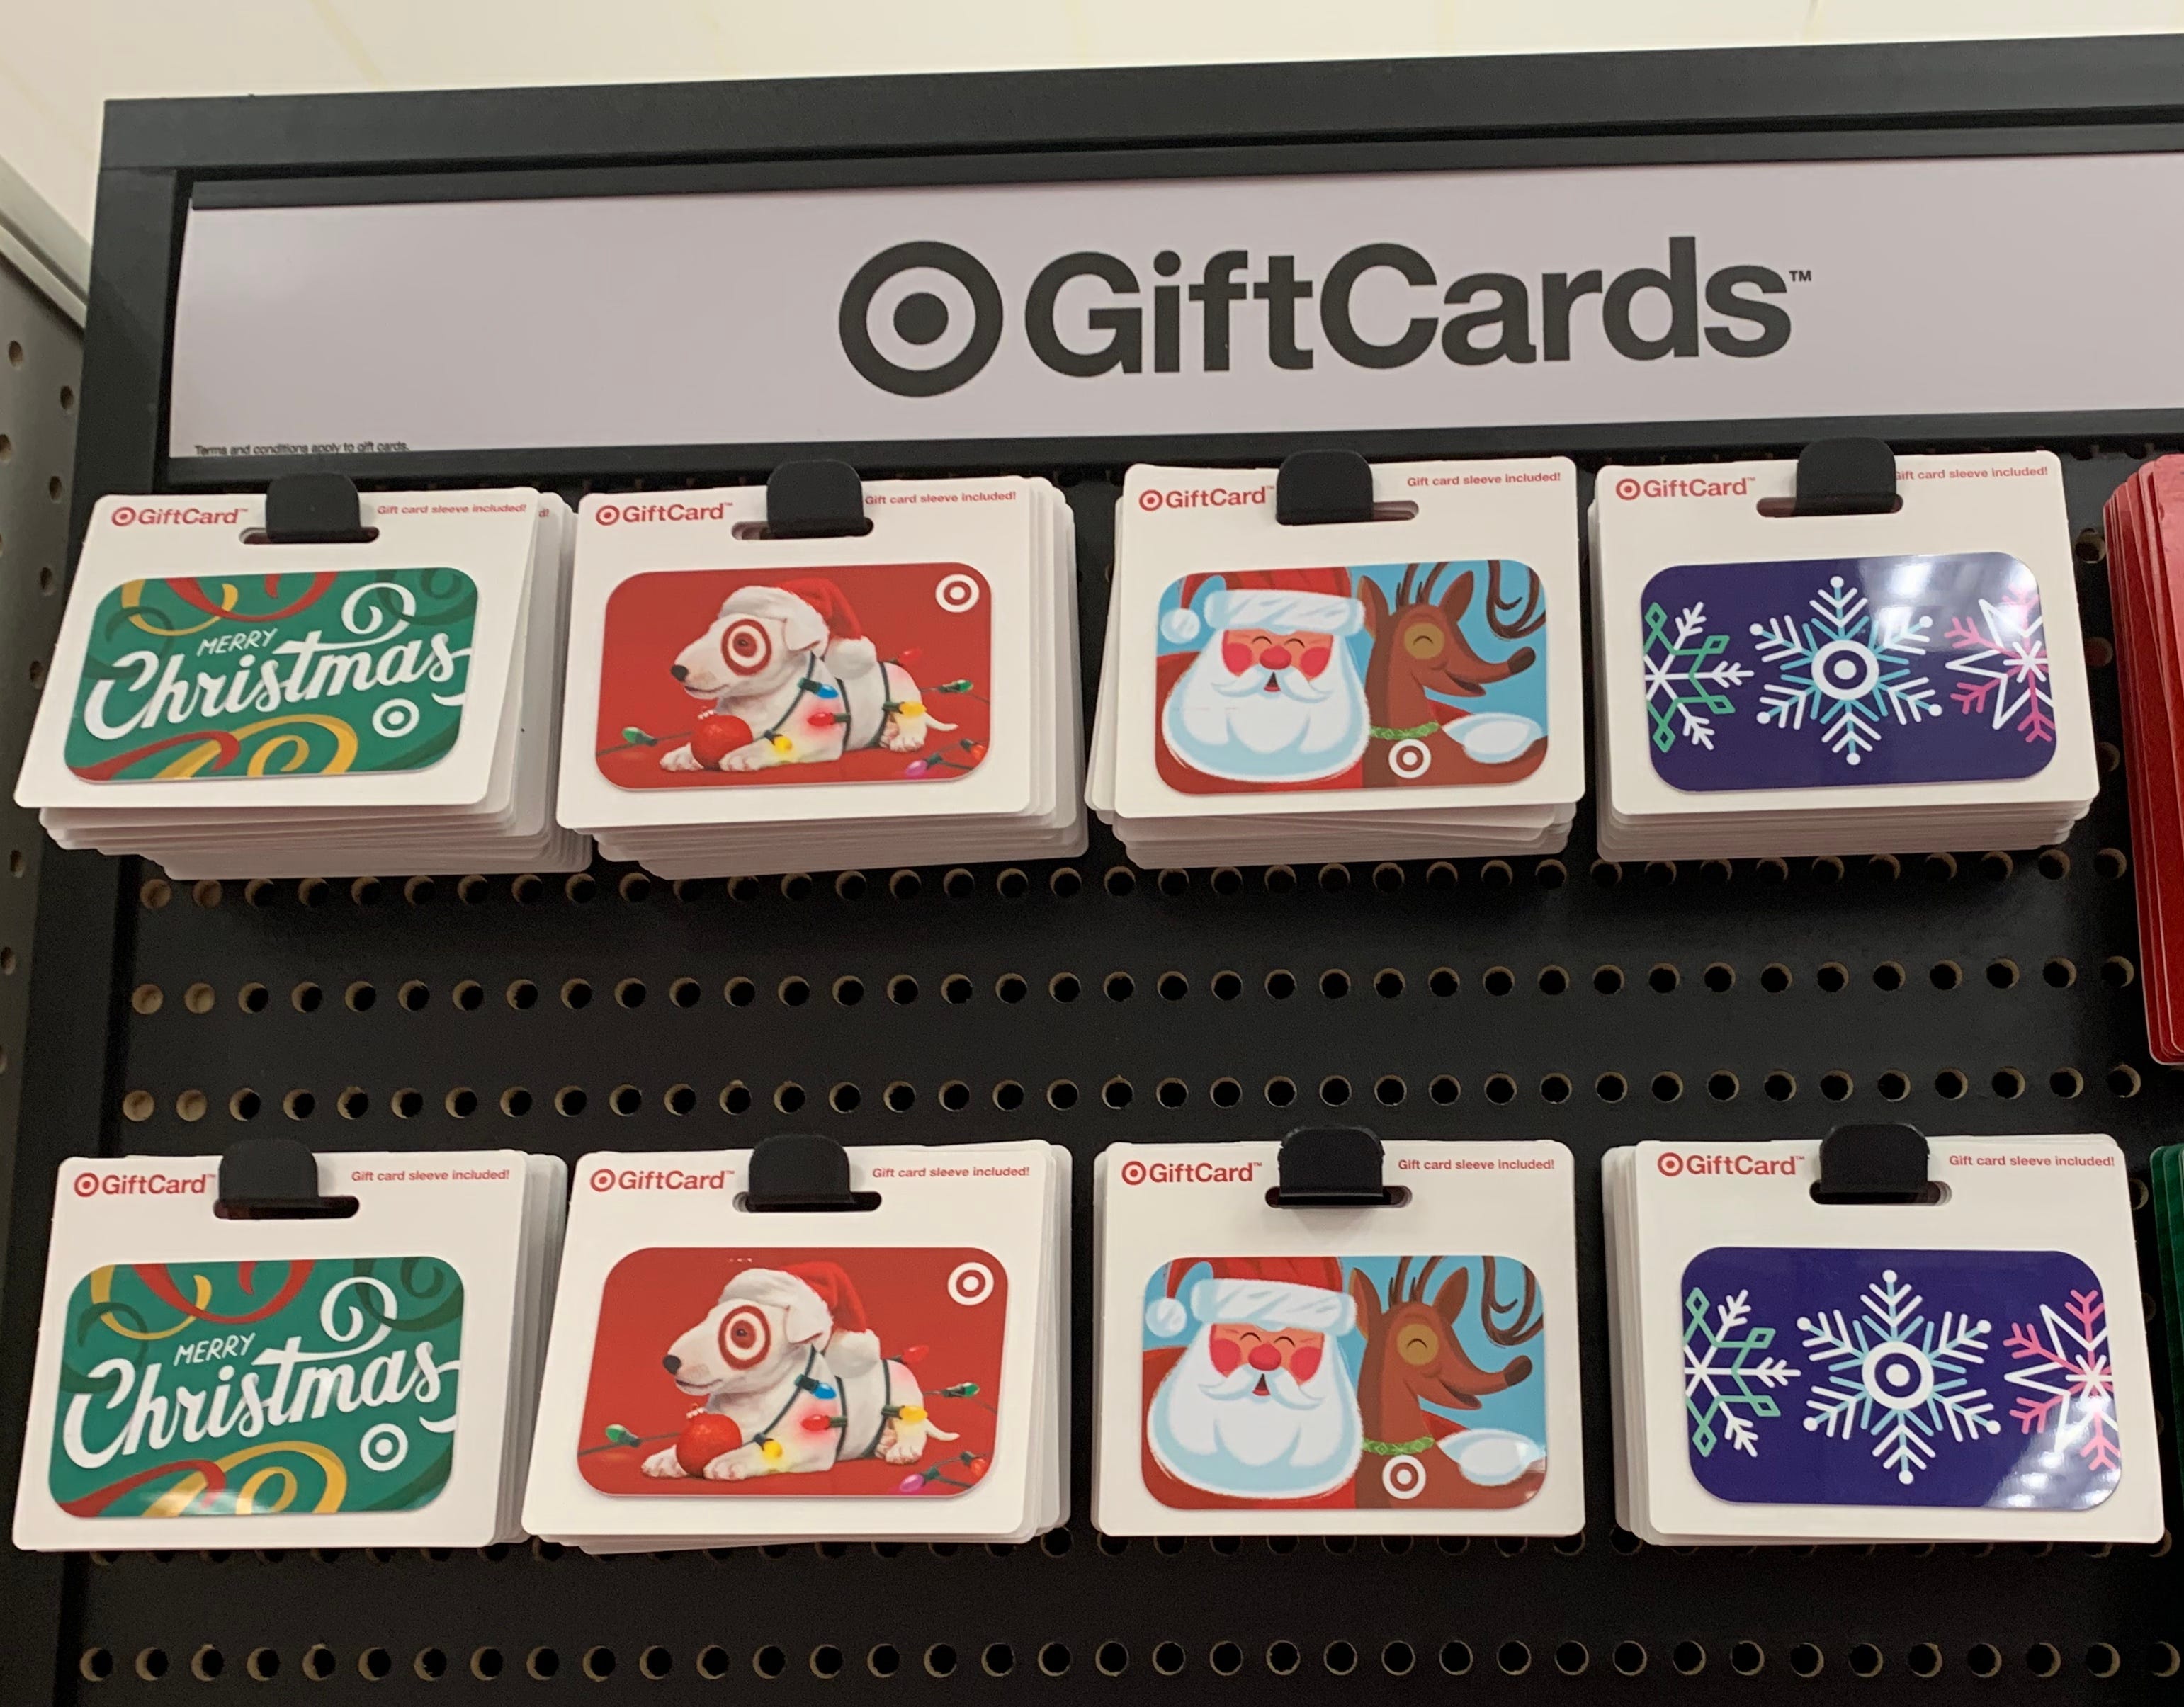 xbox one gift card target